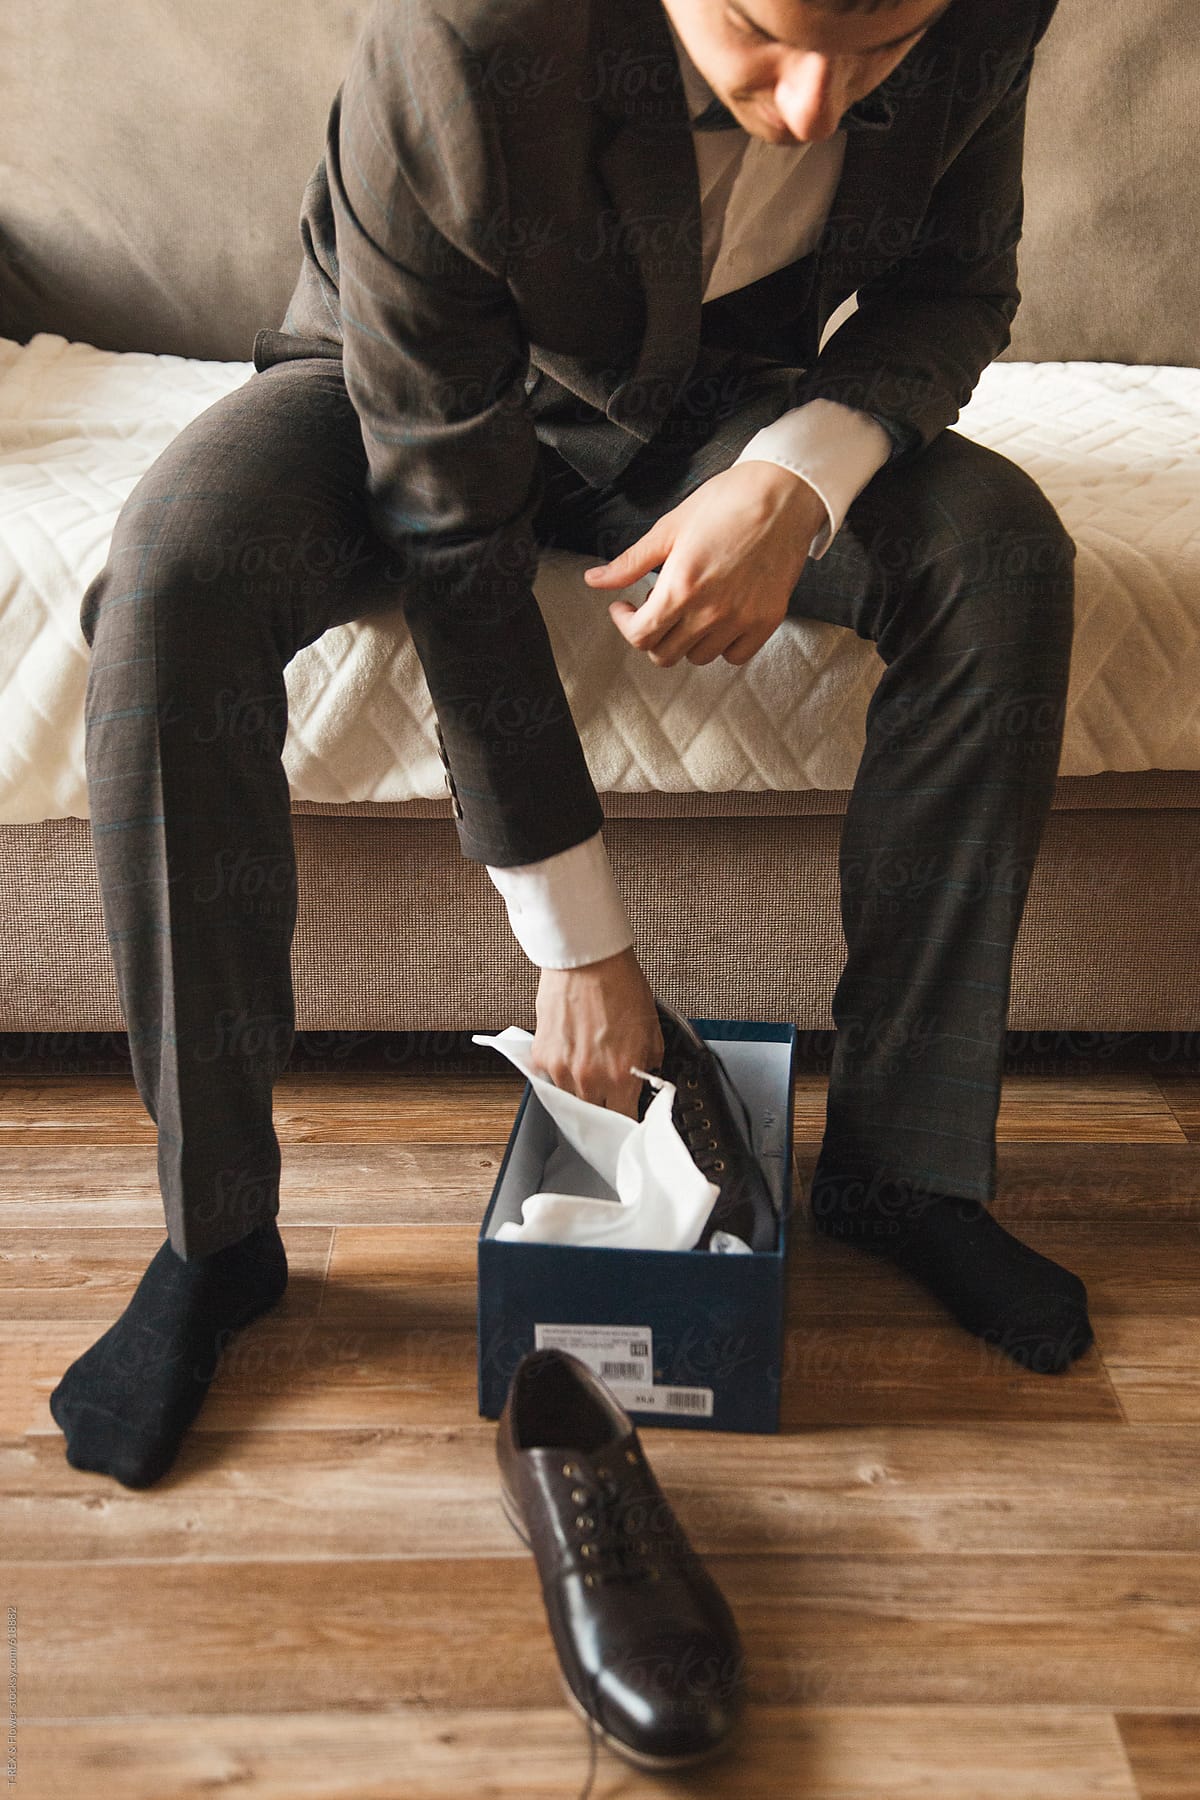 Man in suit taking out new shoes